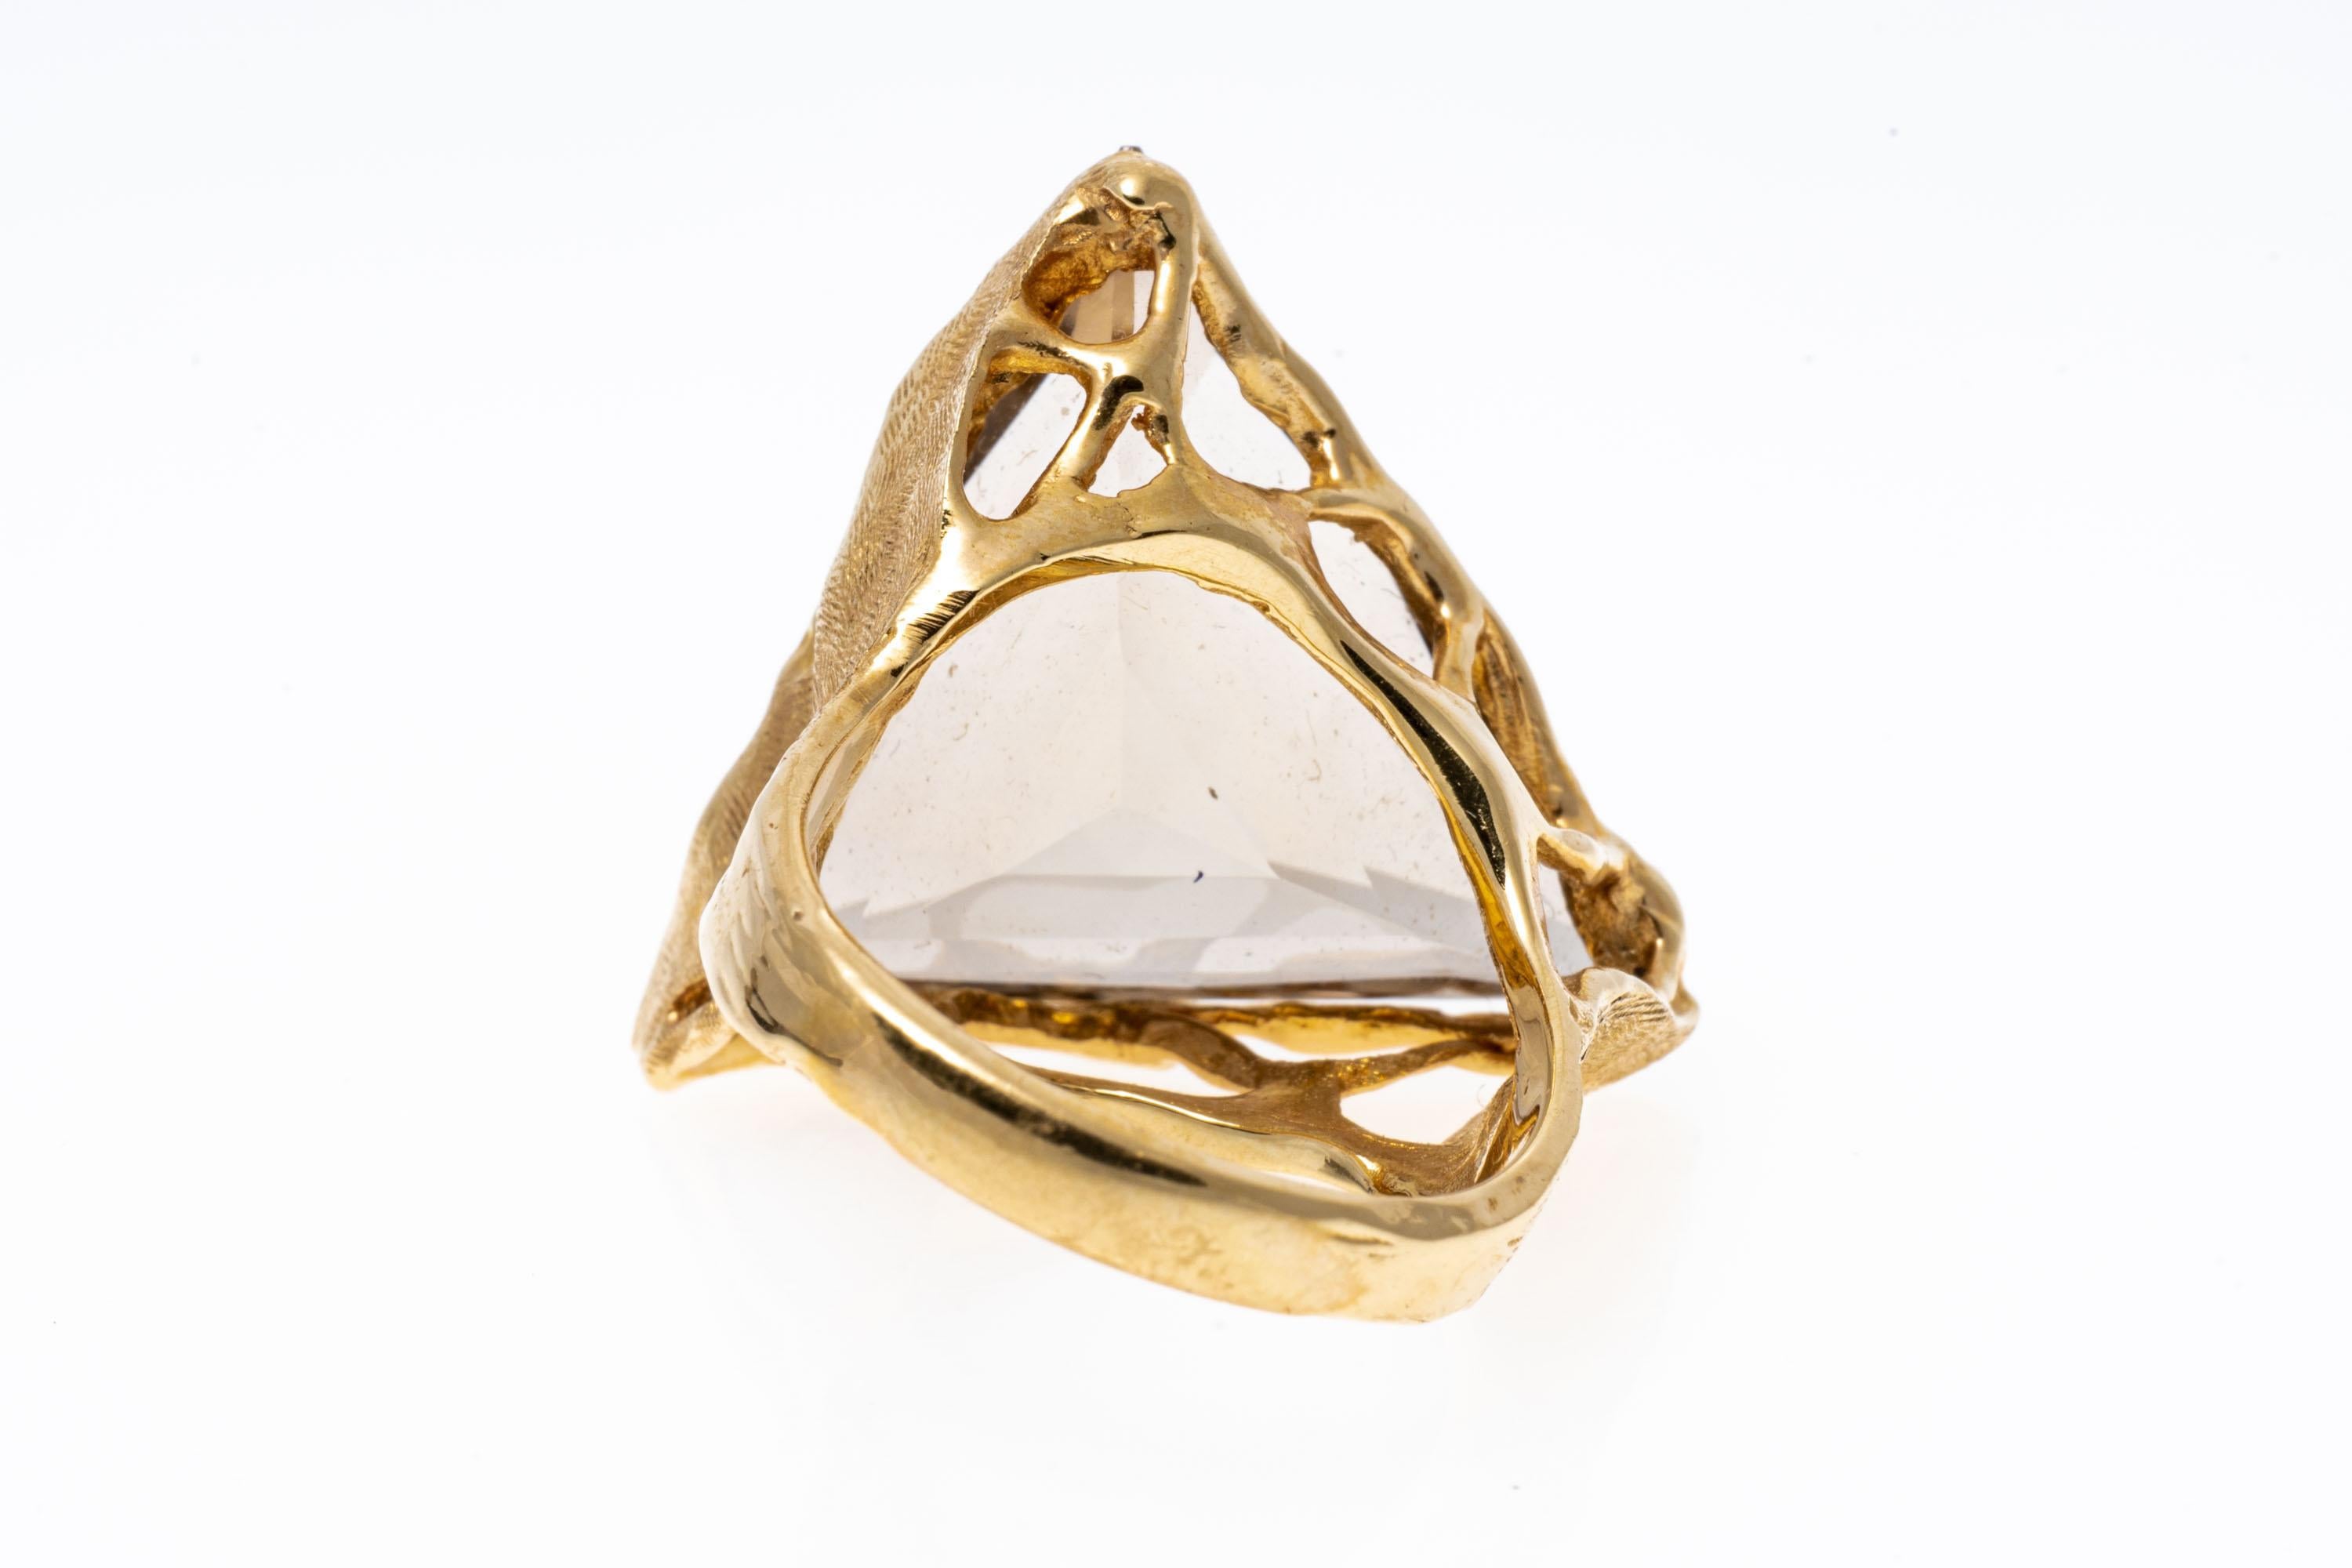 14k yellow gold ring. This contemporary ring features a striking large trillion faceted, pale brown smoky quartz ring, approximately 19.36 CTS, set into a free form style mounting with large chased foliate themed shoulders.
Marks: 14k
Dimensions: